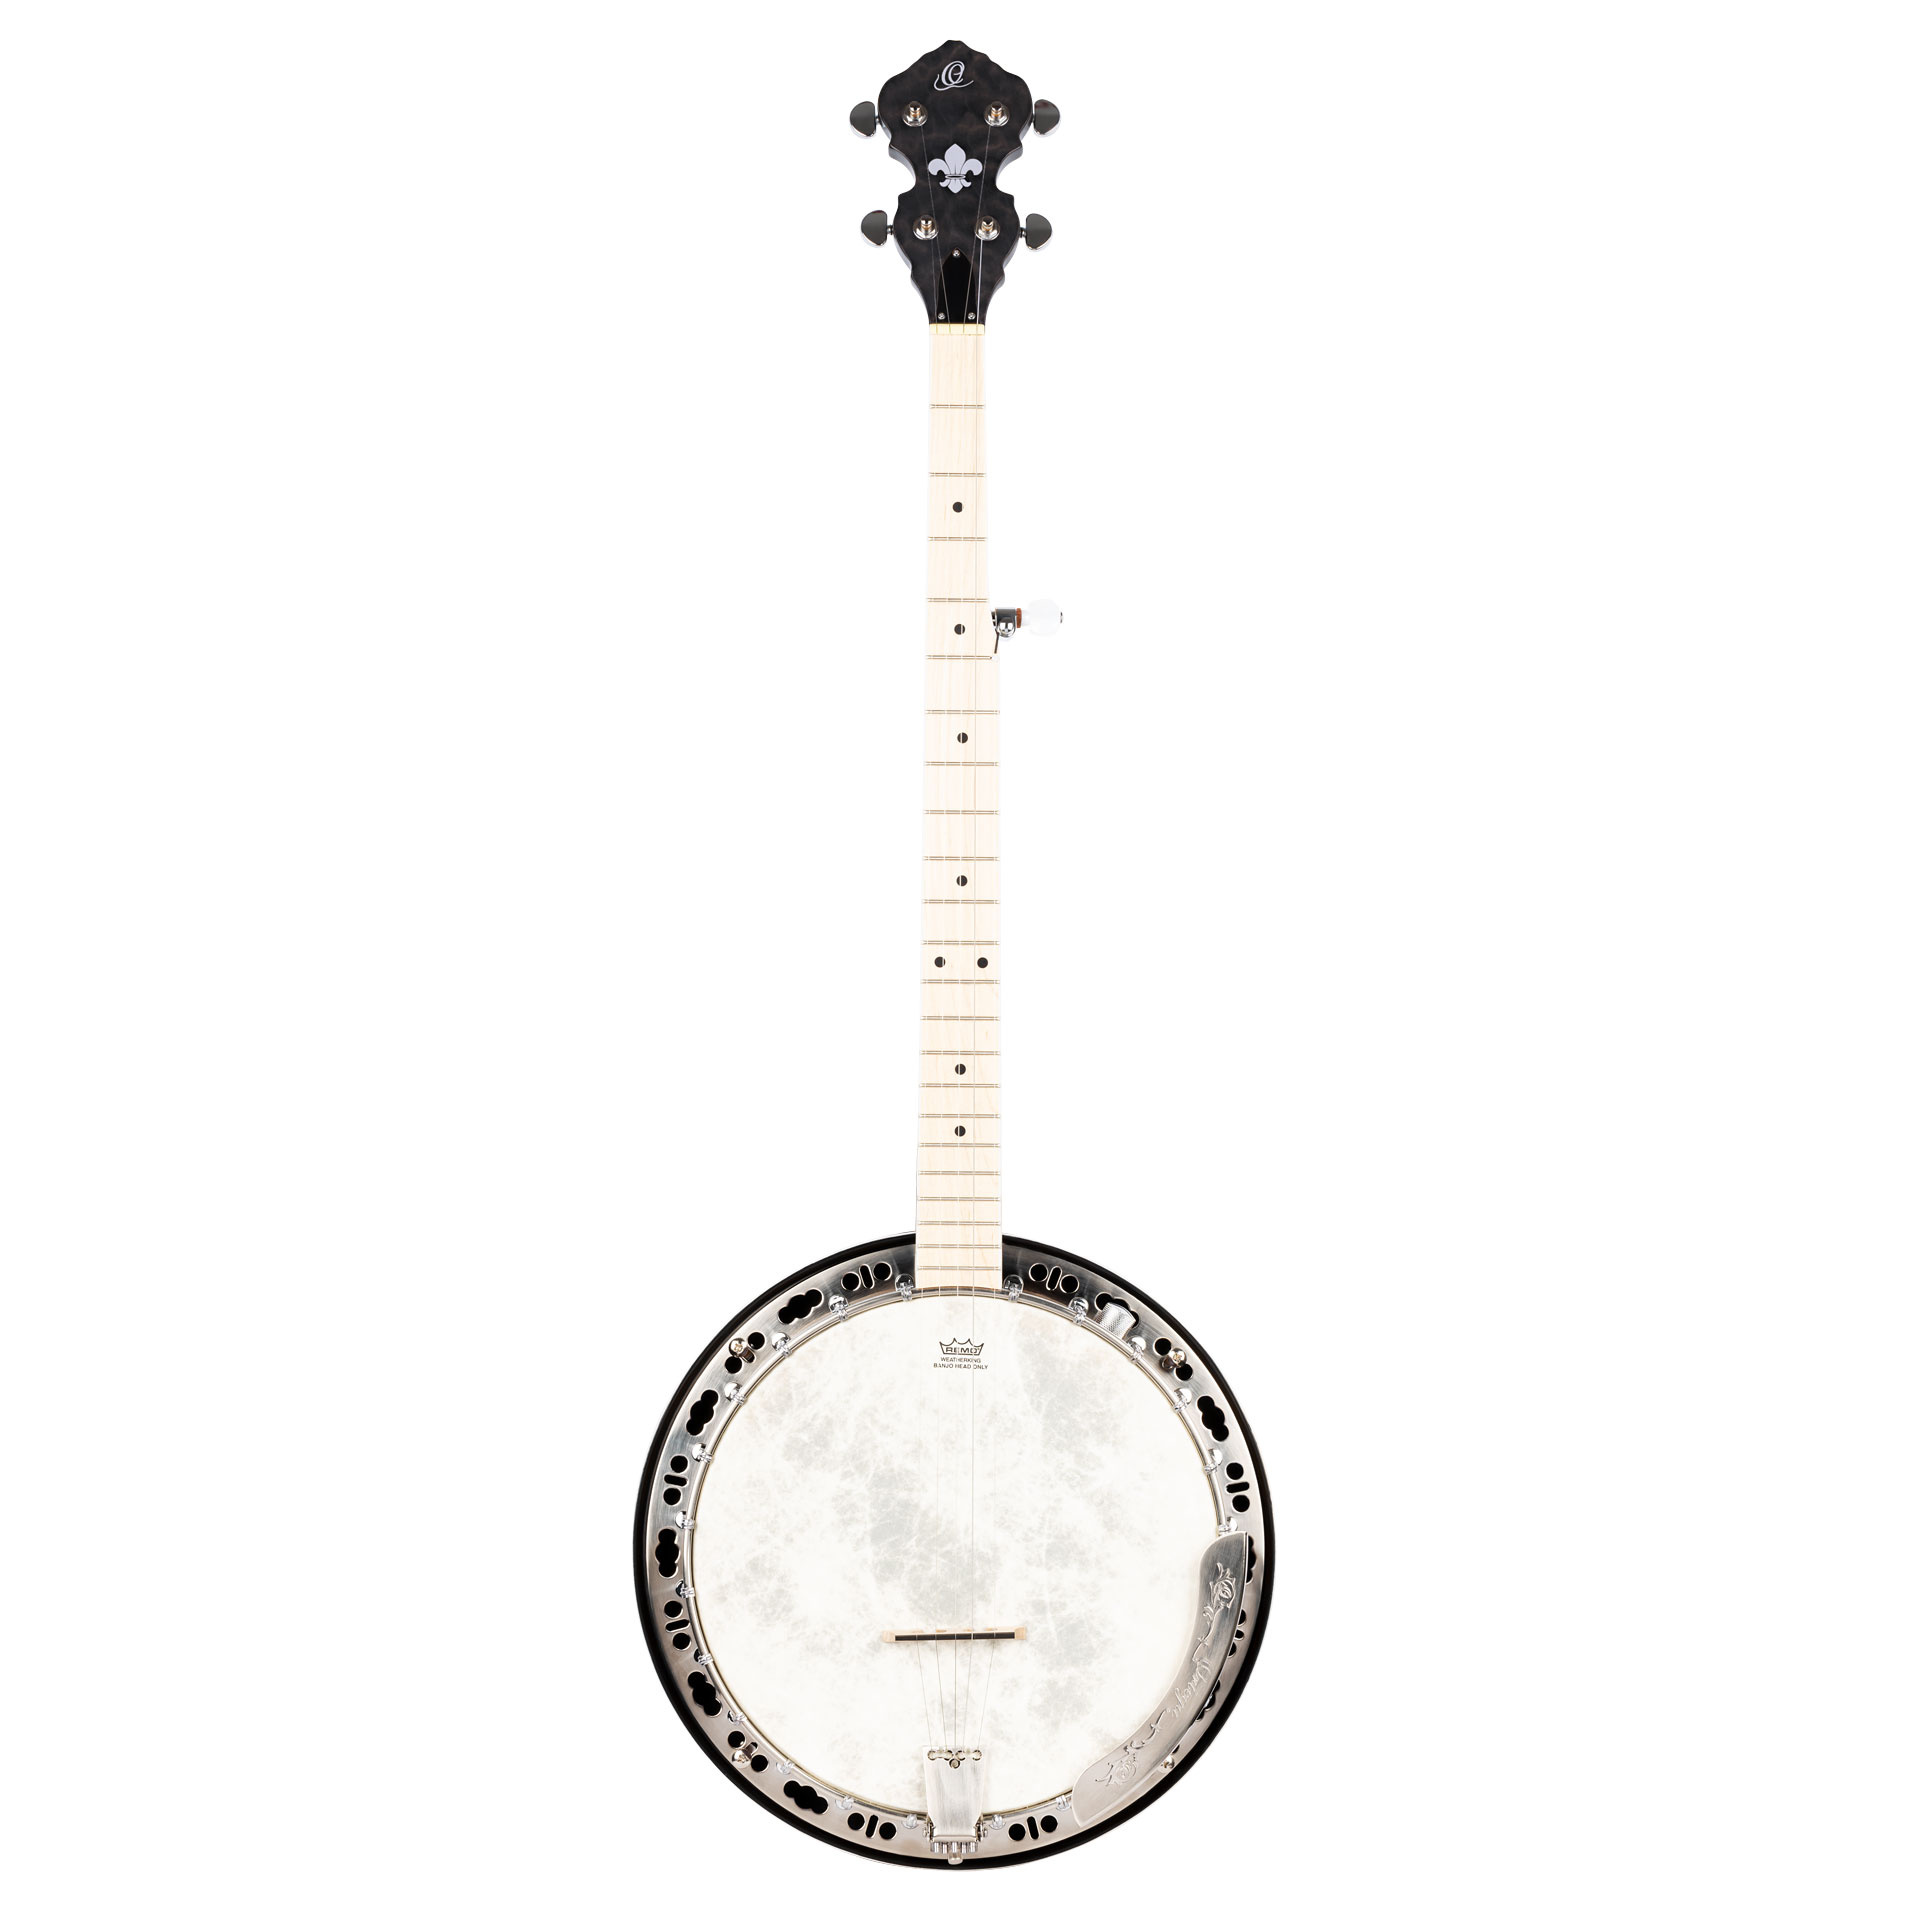 Banjo: Ortega OBJE400TCO-L, Bluegrass, A musical stringed instrument with a round body and a long neck. 1920x1920 HD Wallpaper.